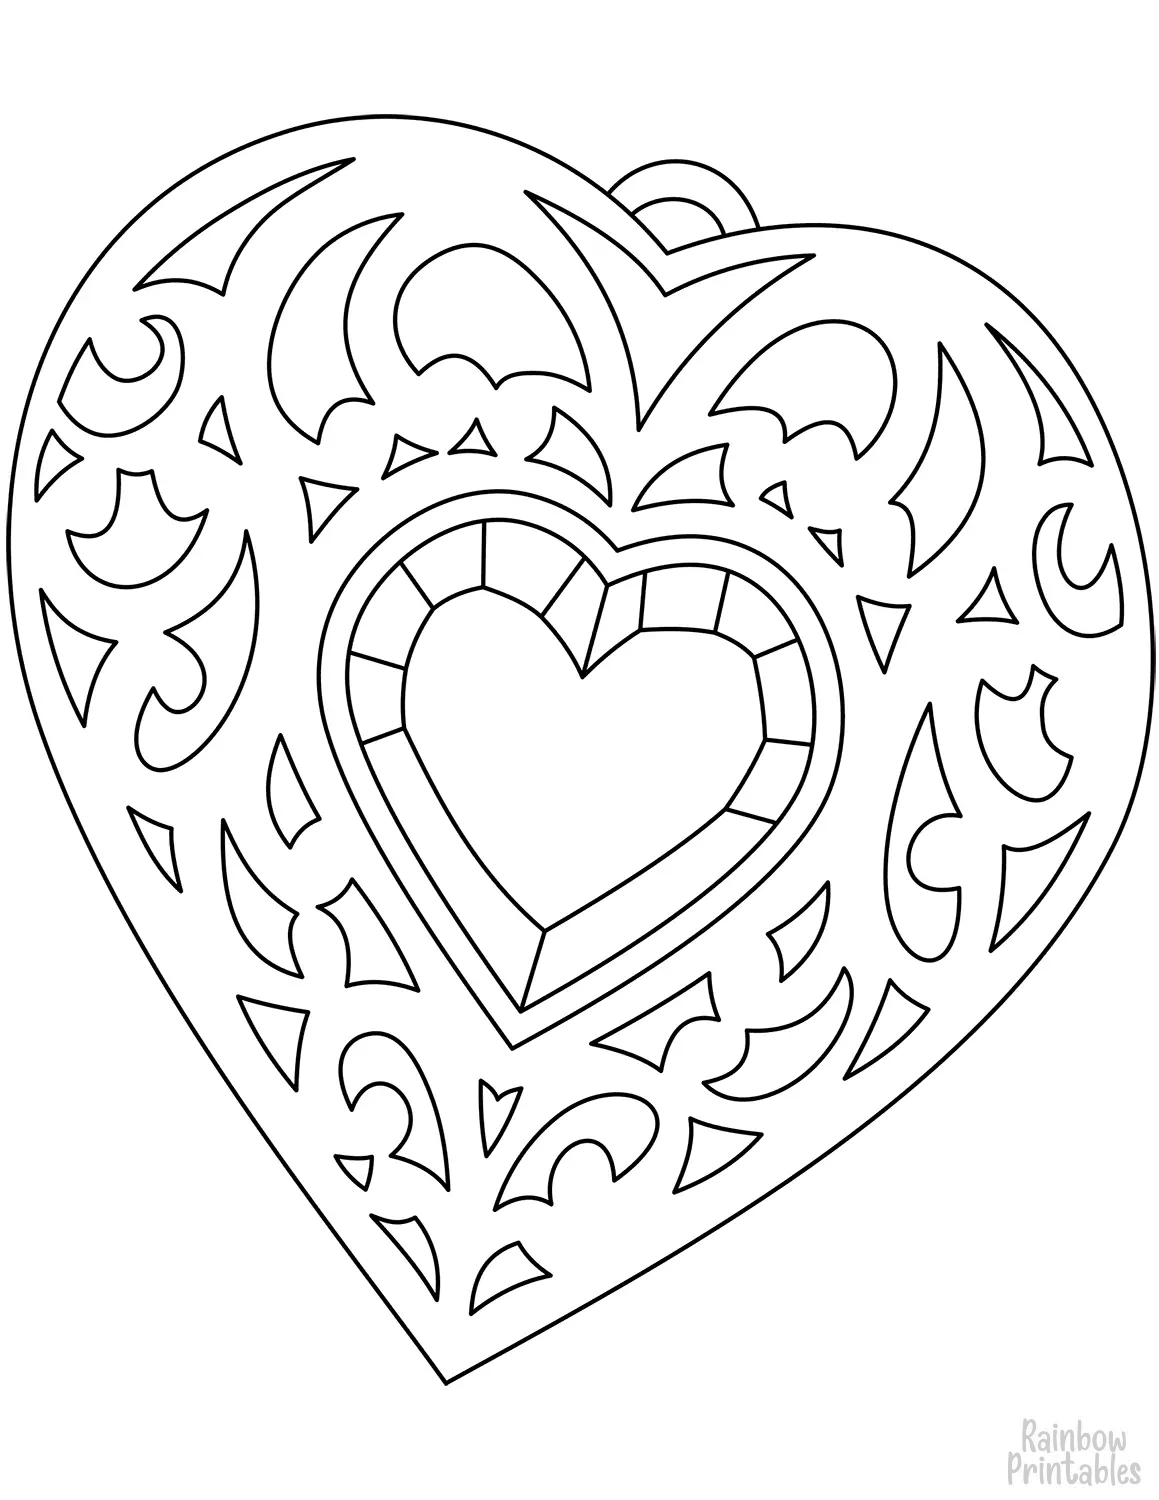 Valentine DAY MEDALLION HEART SHAPE Clipart Coloring Pages for Kids Adults Art Activities Line Art-15